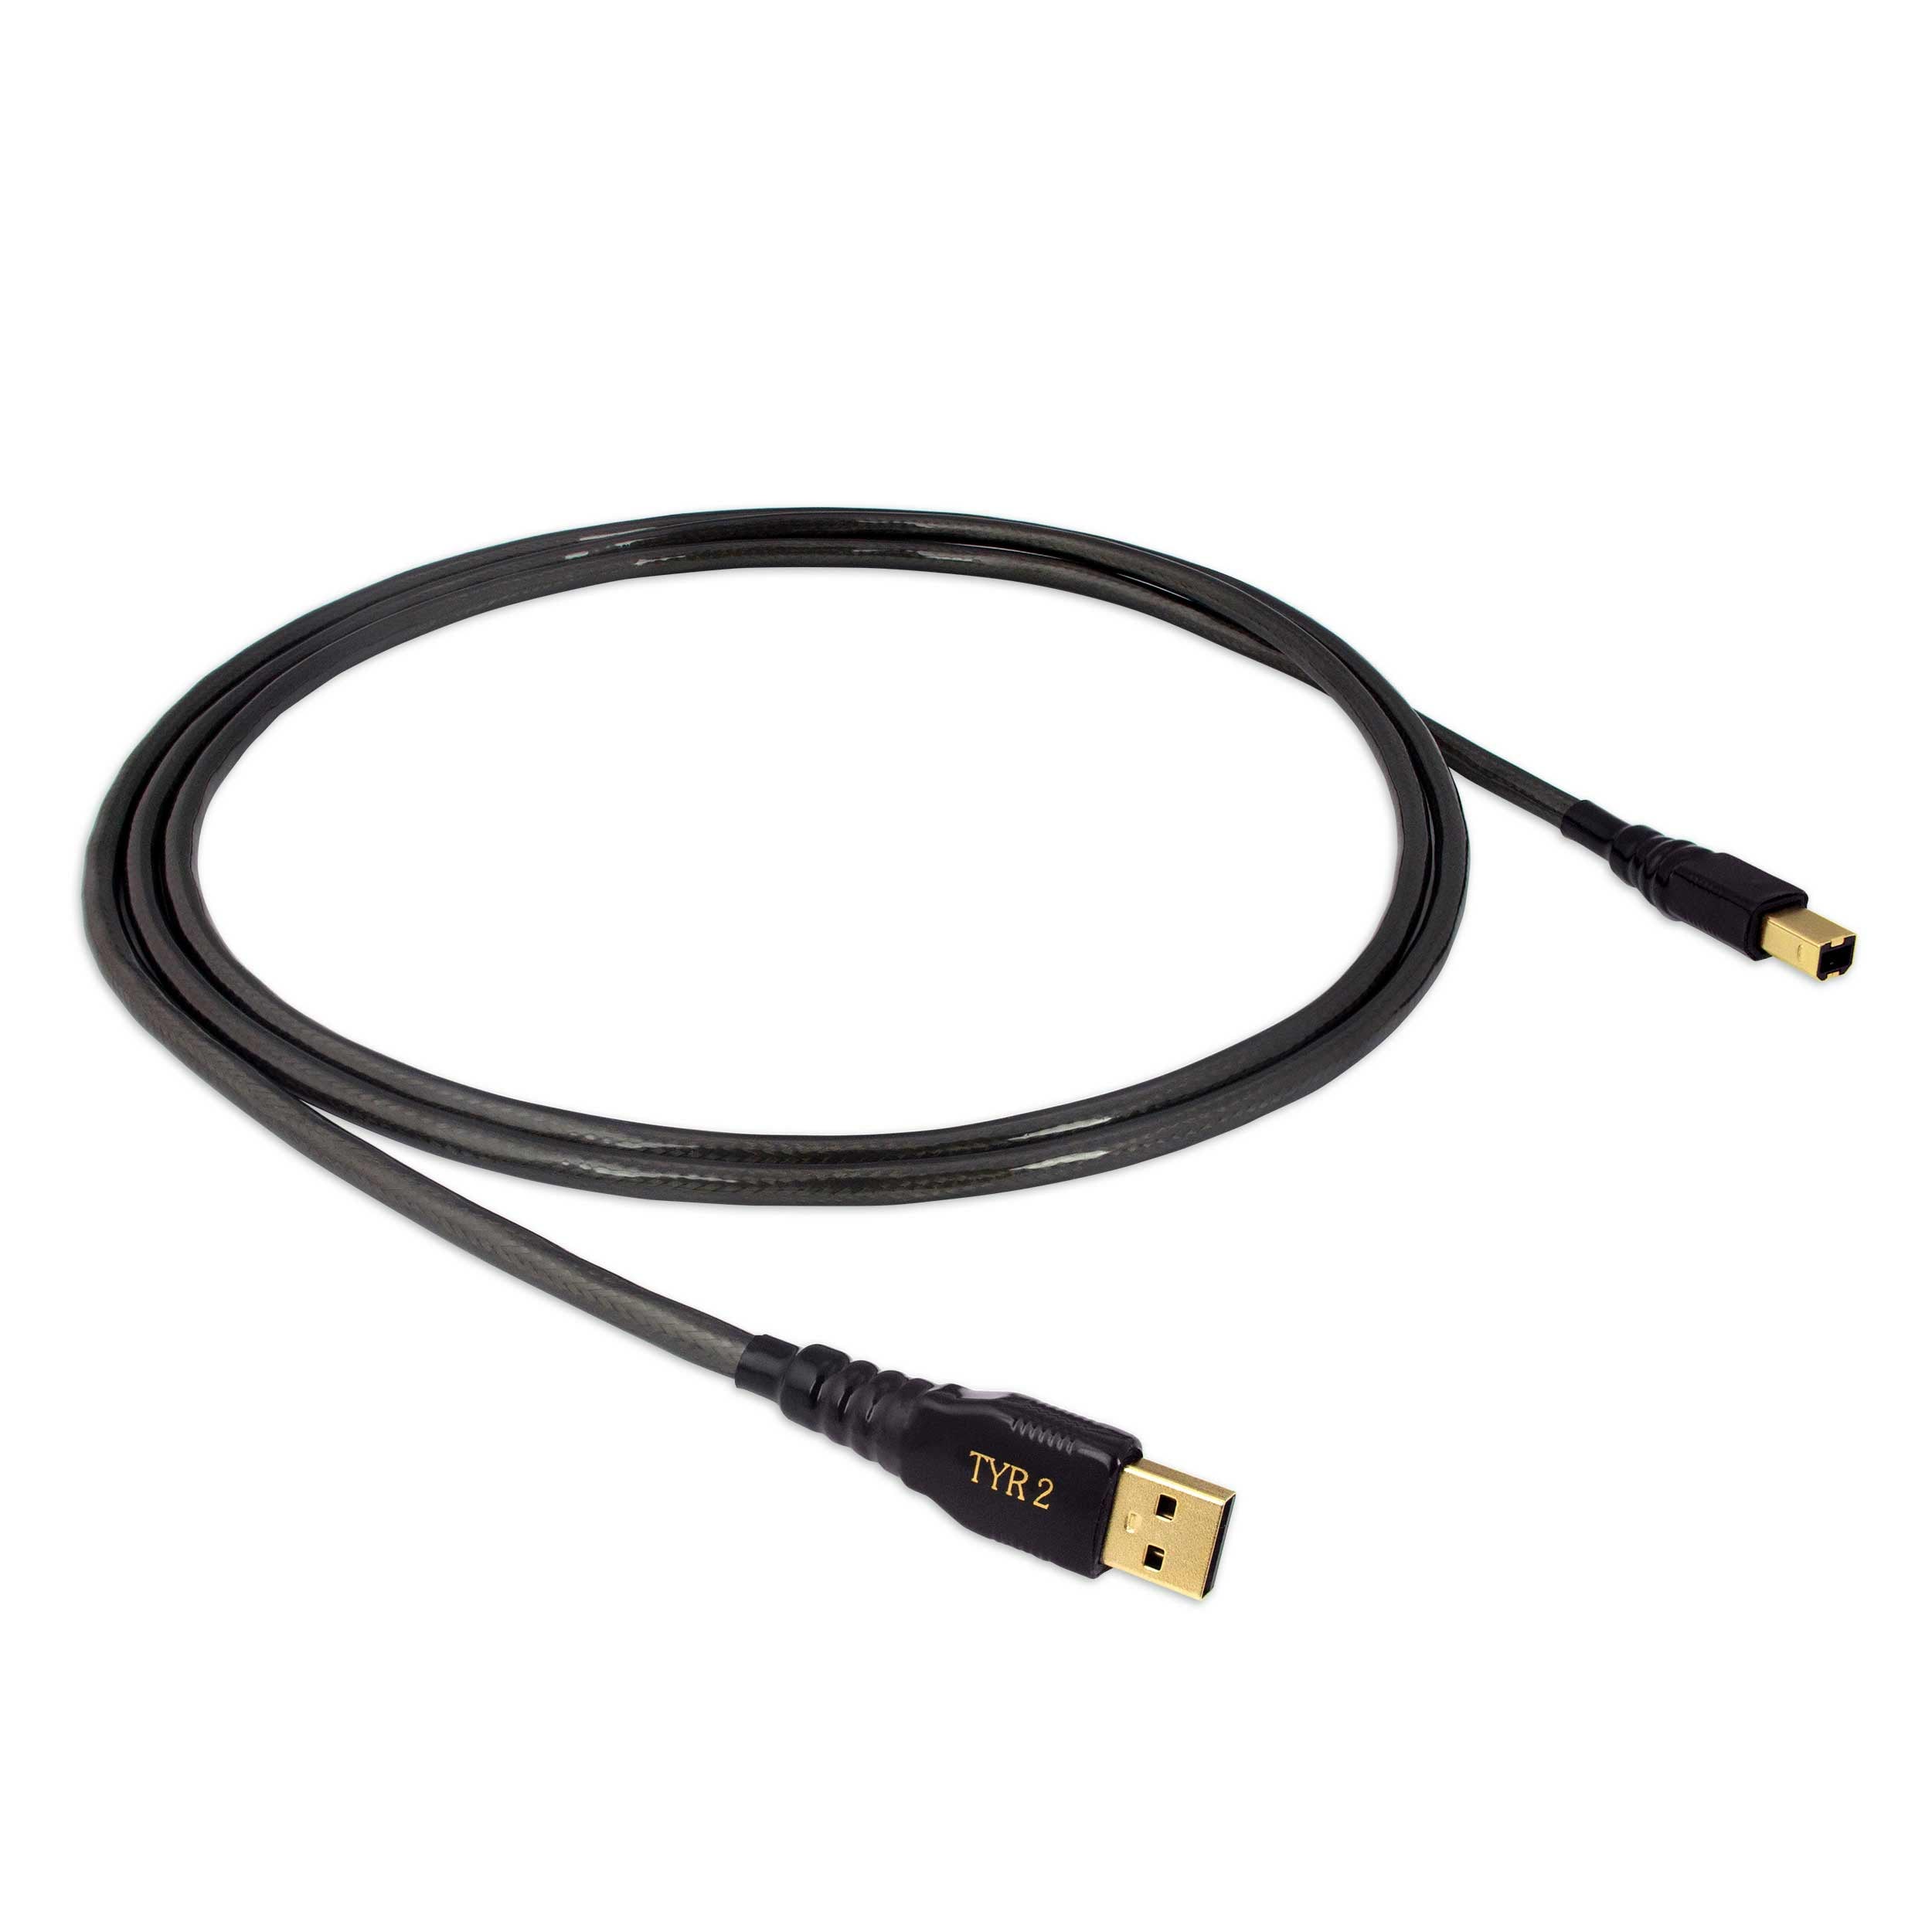 Nordost Norse Tyr 2 USB 2.0 Cable